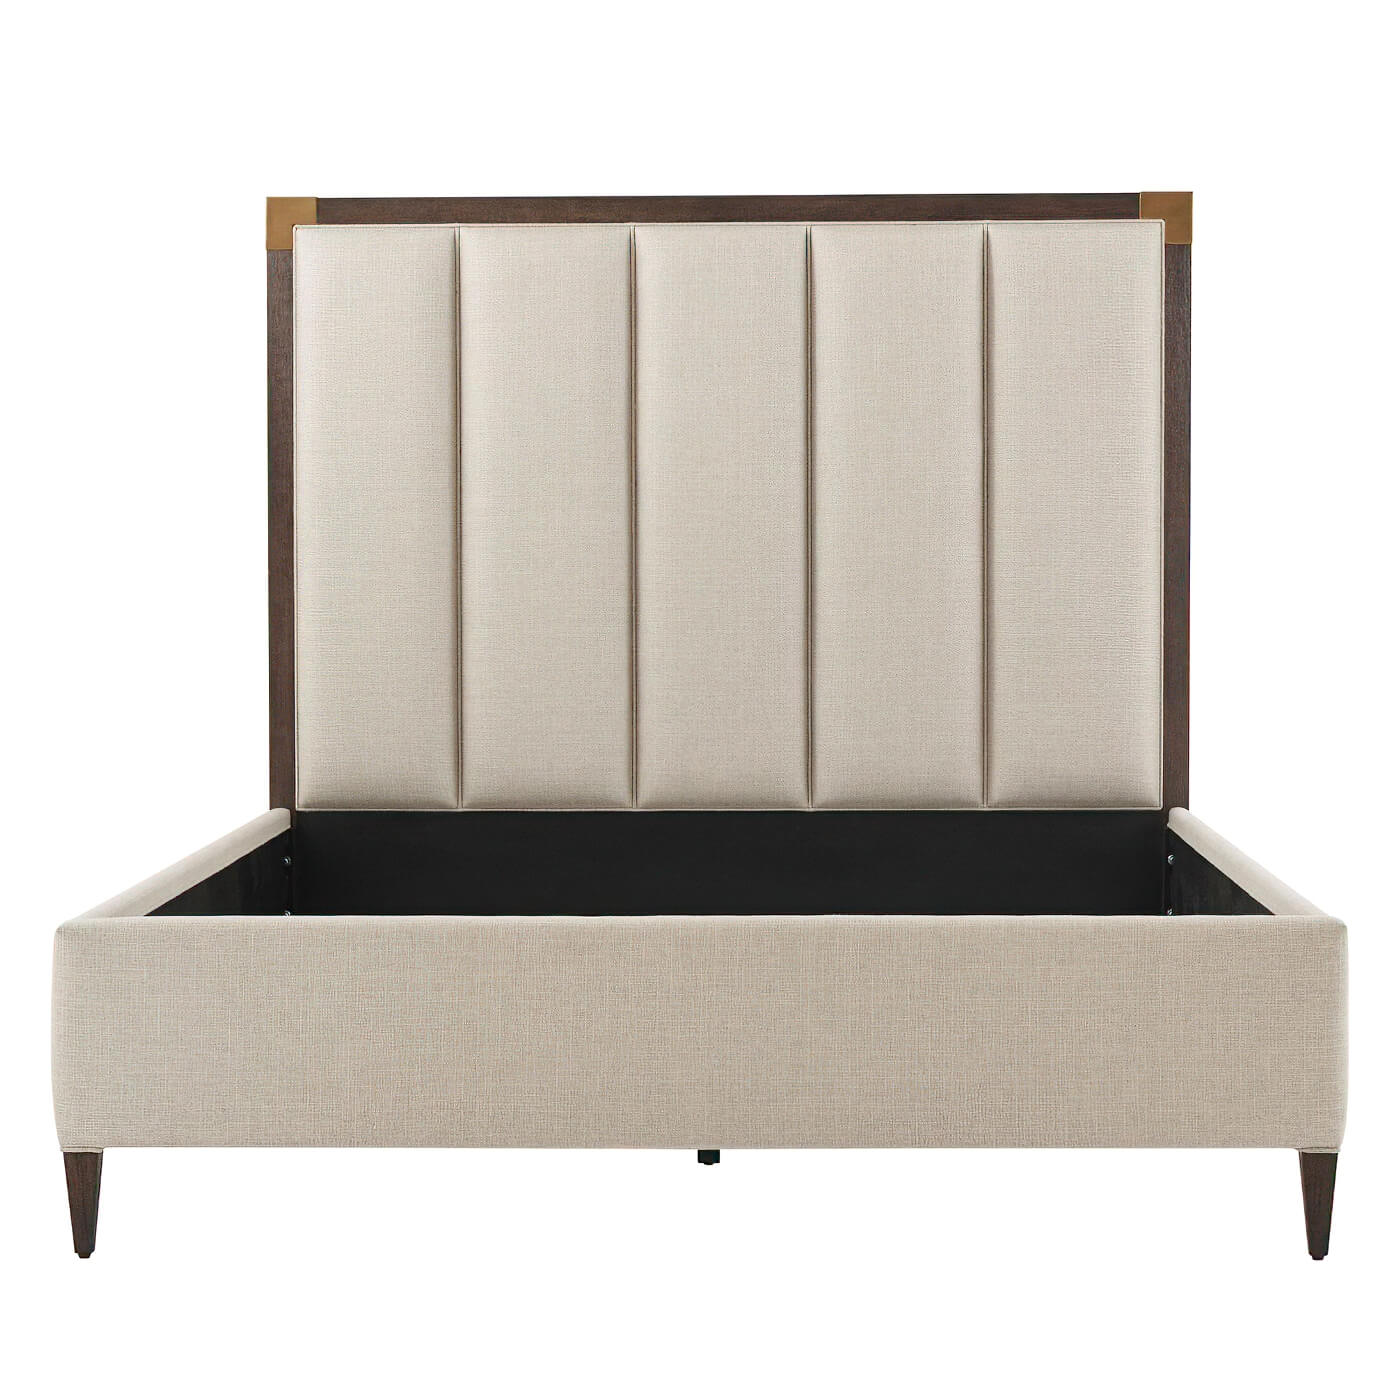 Art Deco Style Queen Size Bed - English Georgian America